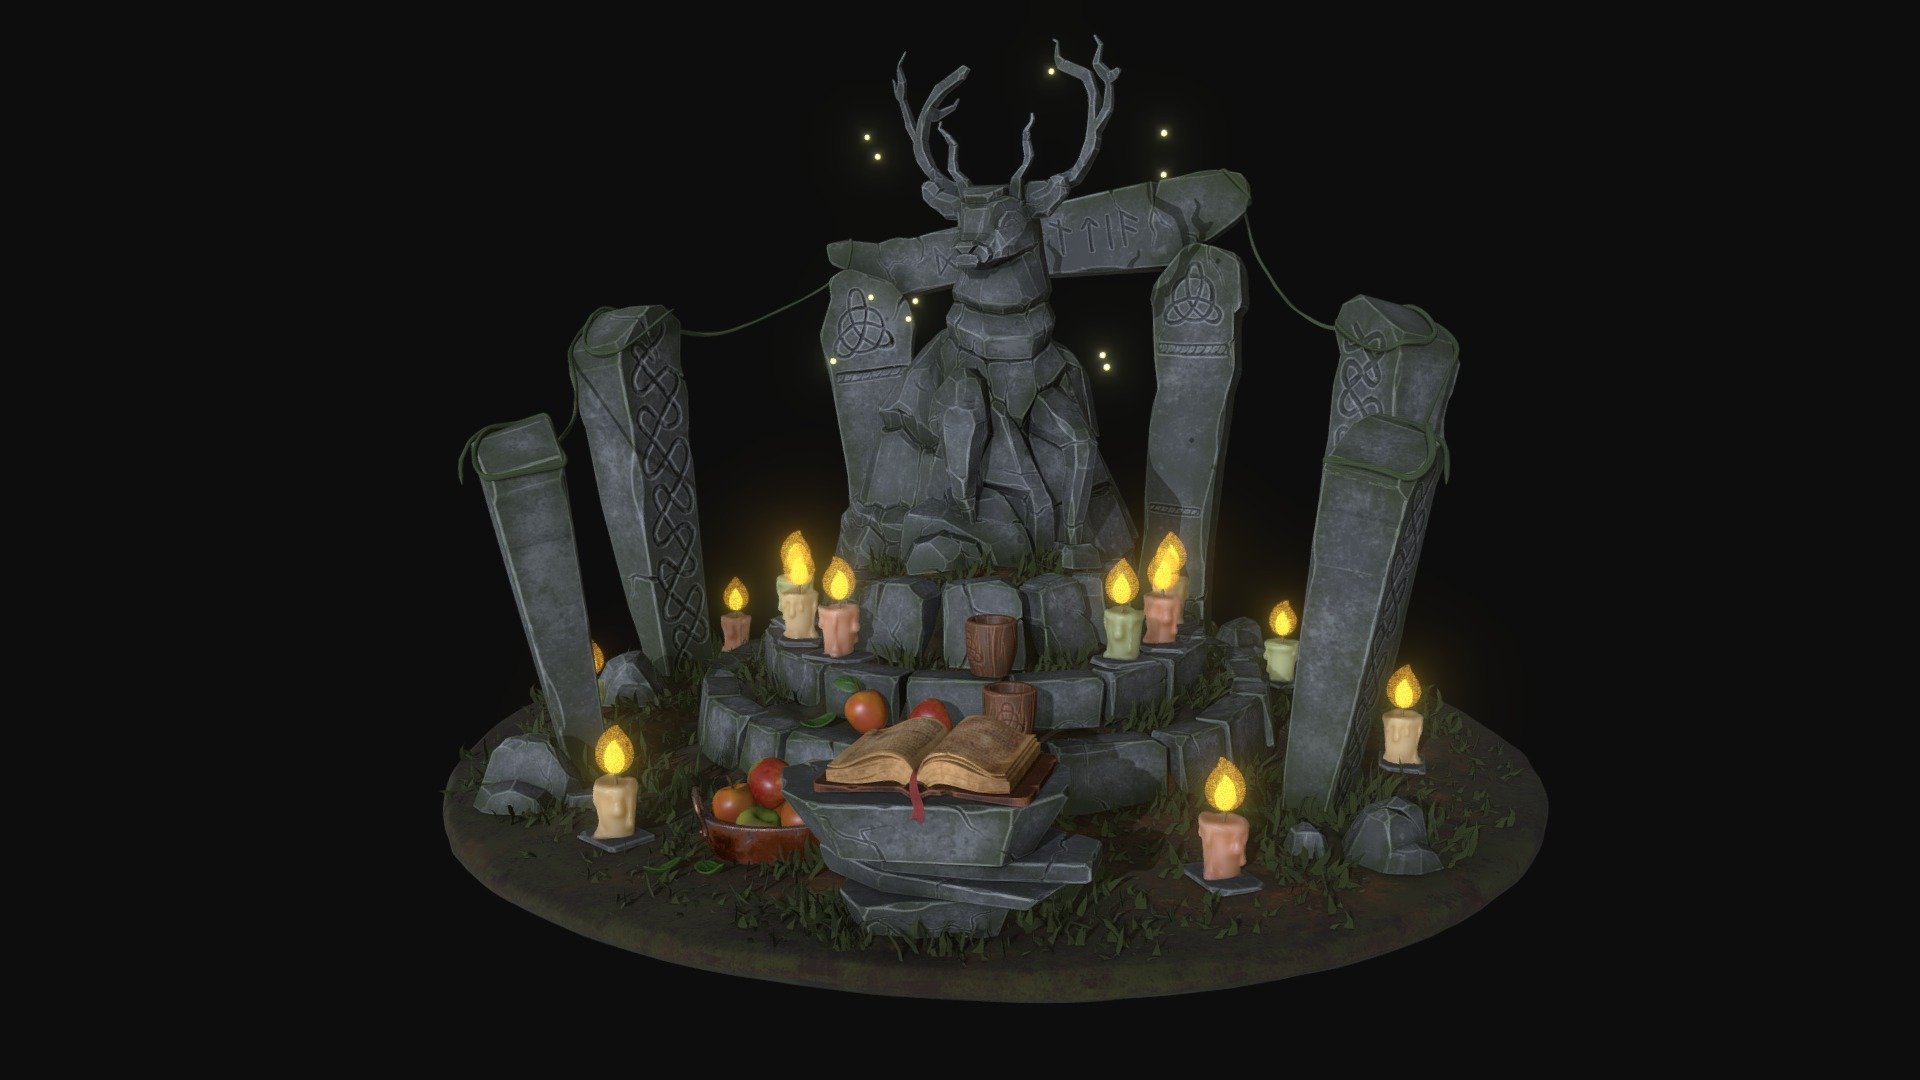 The Celts have come and made their offerings to Druantia - the goddess queen of the Druids. They have given her food and wine, and read a prayer from the Sacred Runic Book in hopes that she will grant them more knowledge, creativity and fertility 3d model